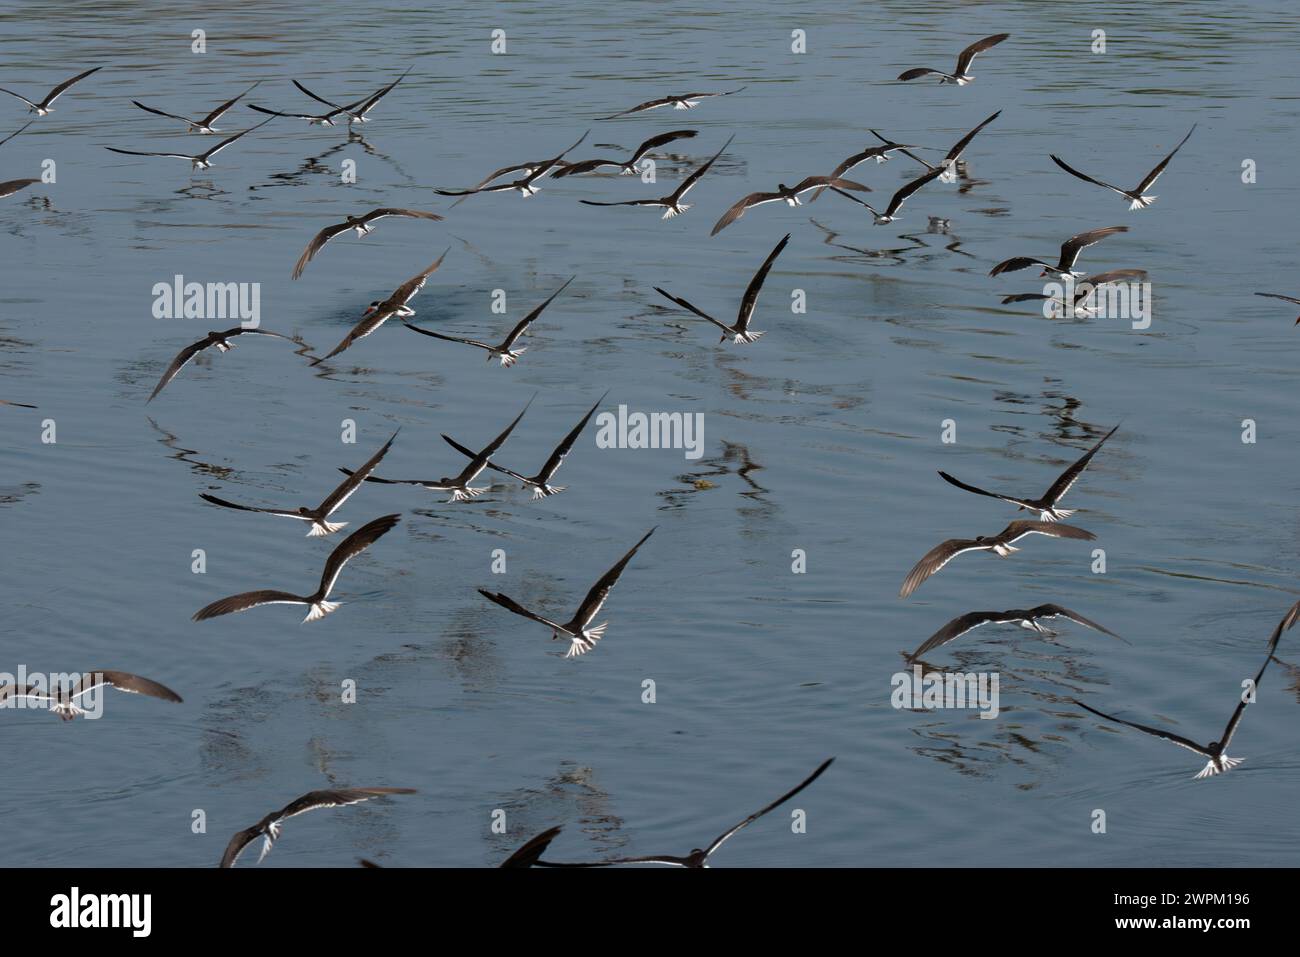 Flight of African skimmers along the Nile river, Murchison Falls National Park, Uganda, East Africa, Africa Stock Photo